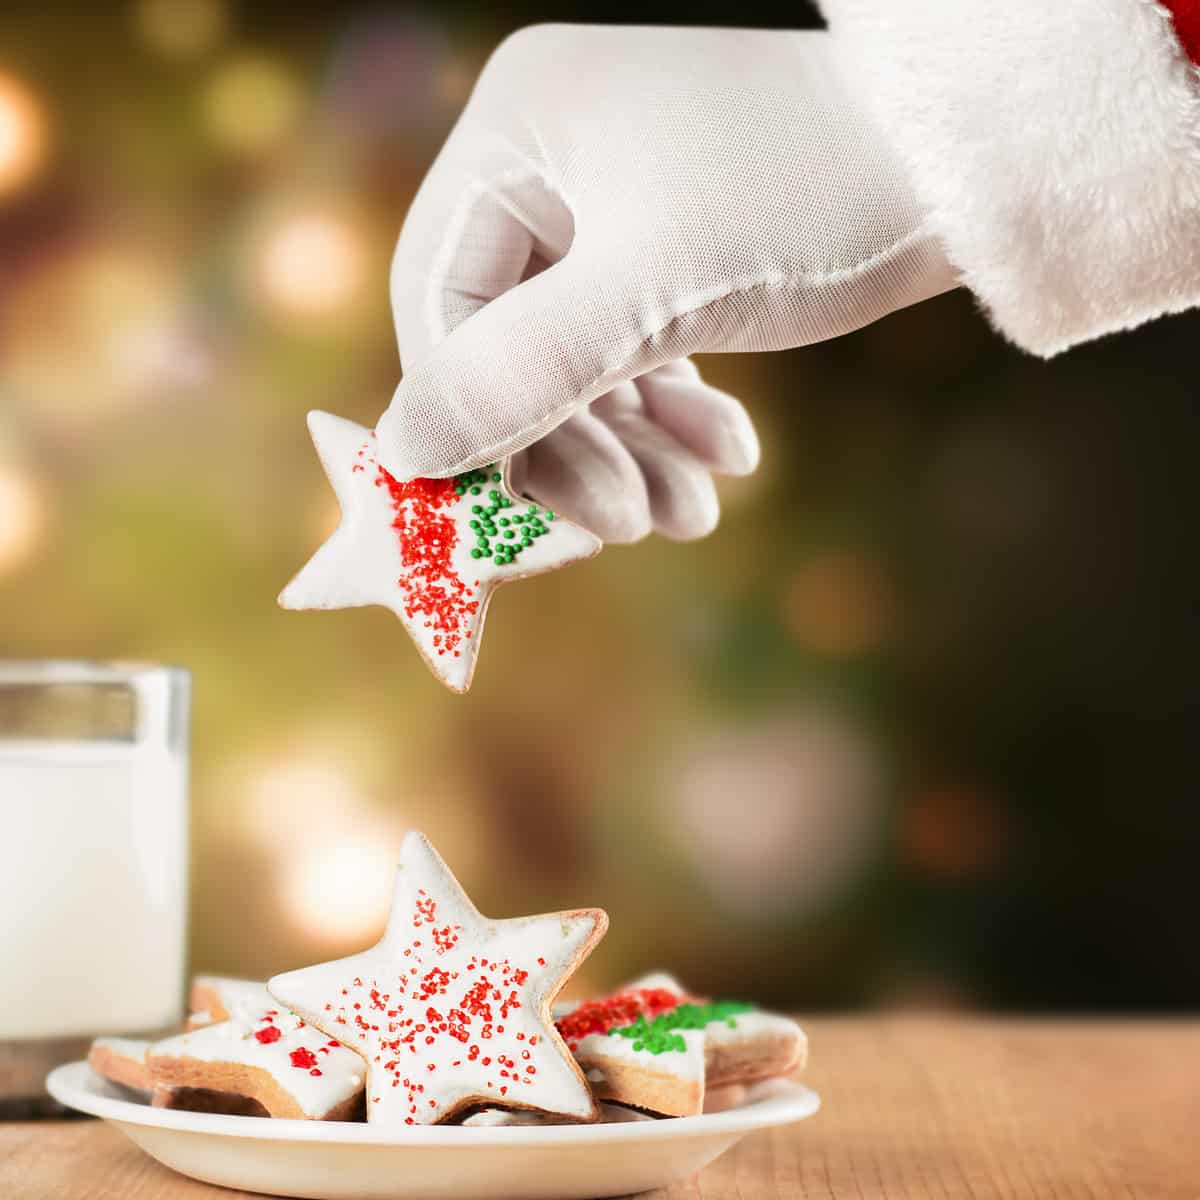 Santa taking a star shaped Christmas cookie, next to a glass of milk.